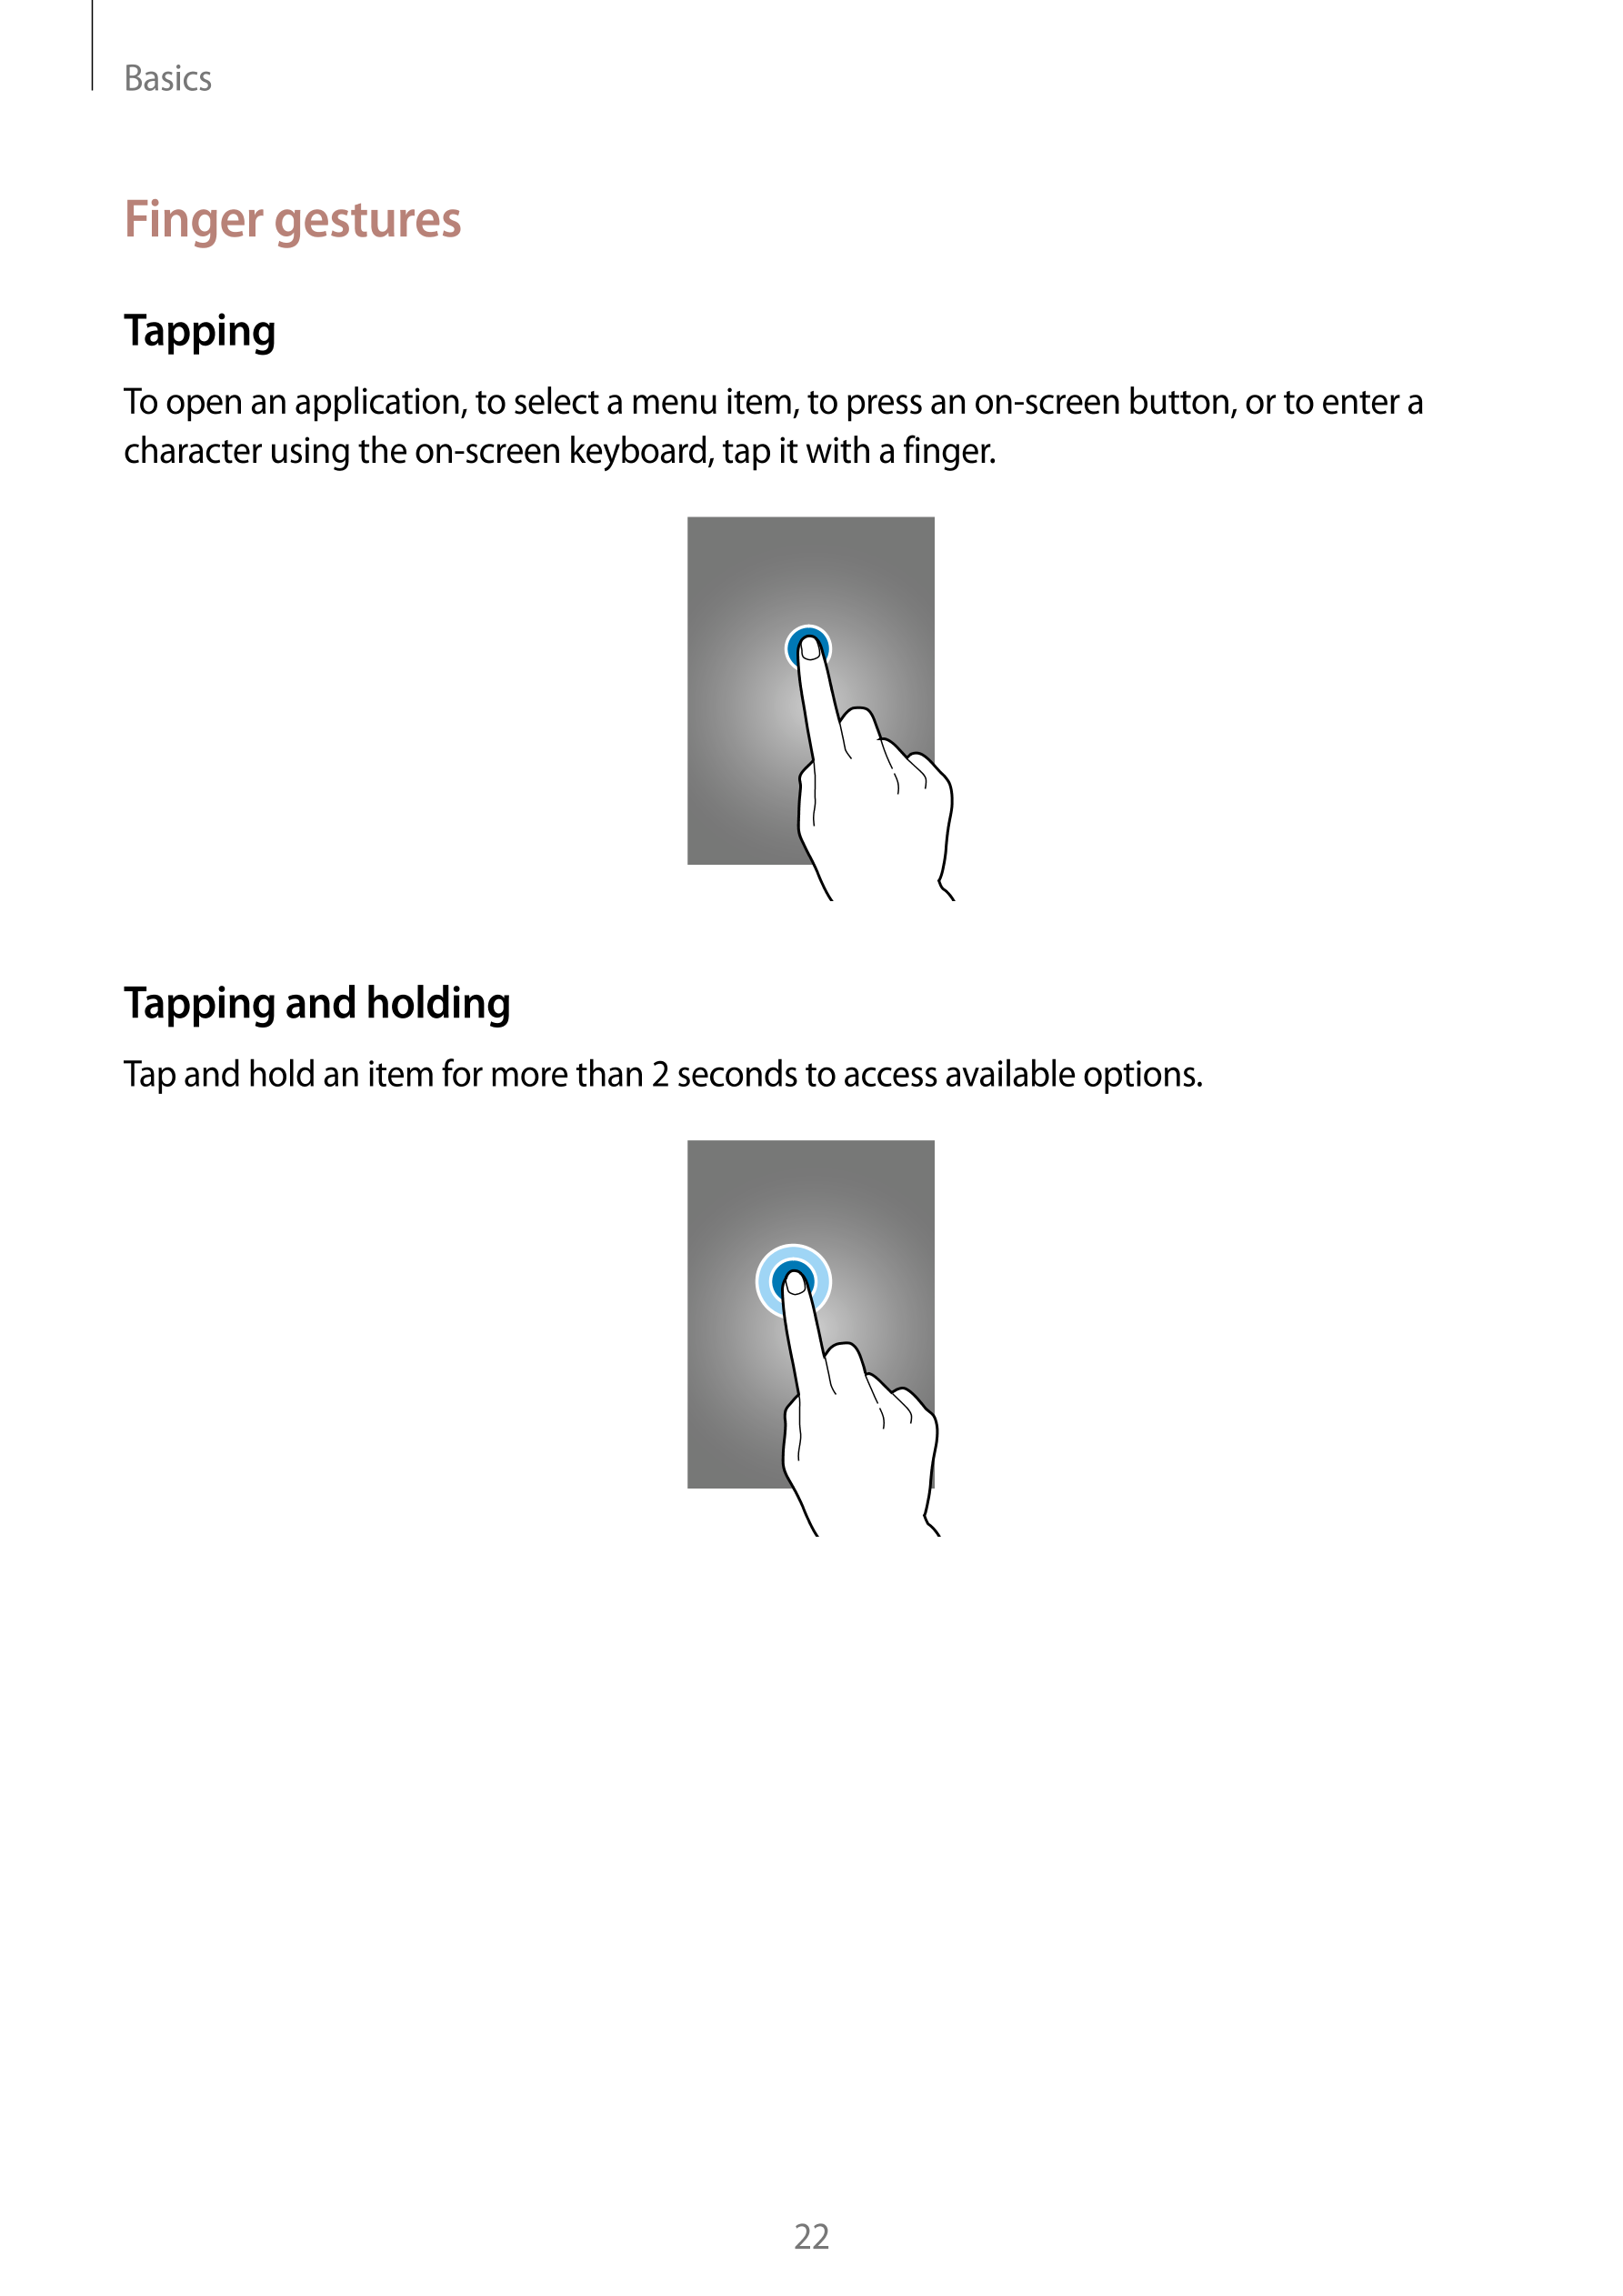 Basics
Finger gestures
Tapping
To open an application, to select a menu item, to press an on-screen button, or to enter a 
chara